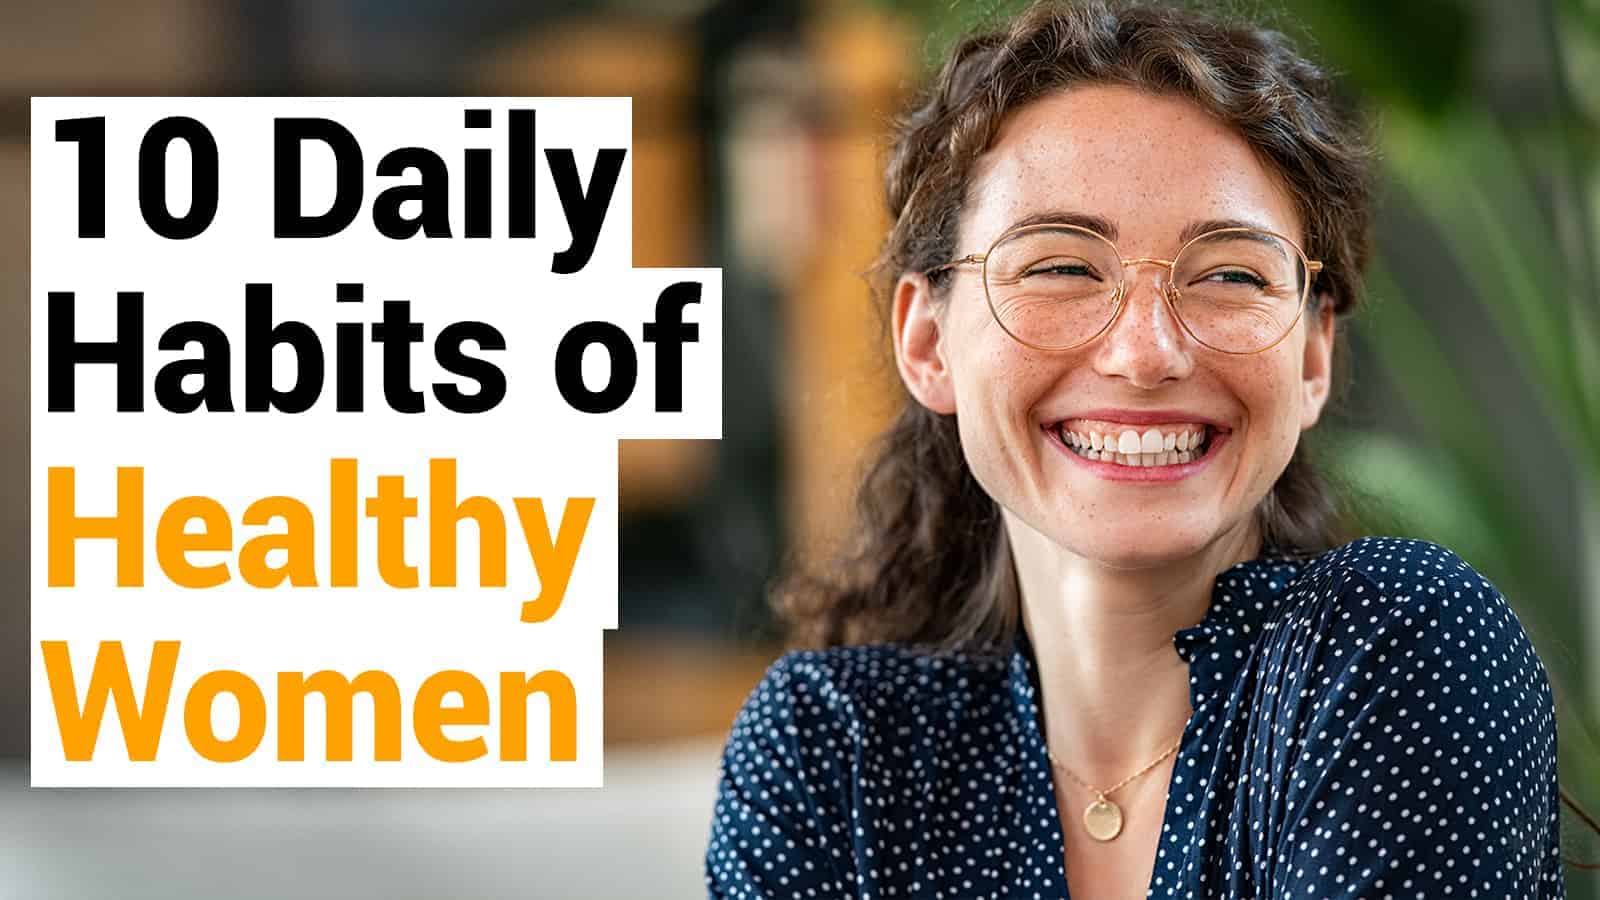 10 Daily Habits of Healthy Women